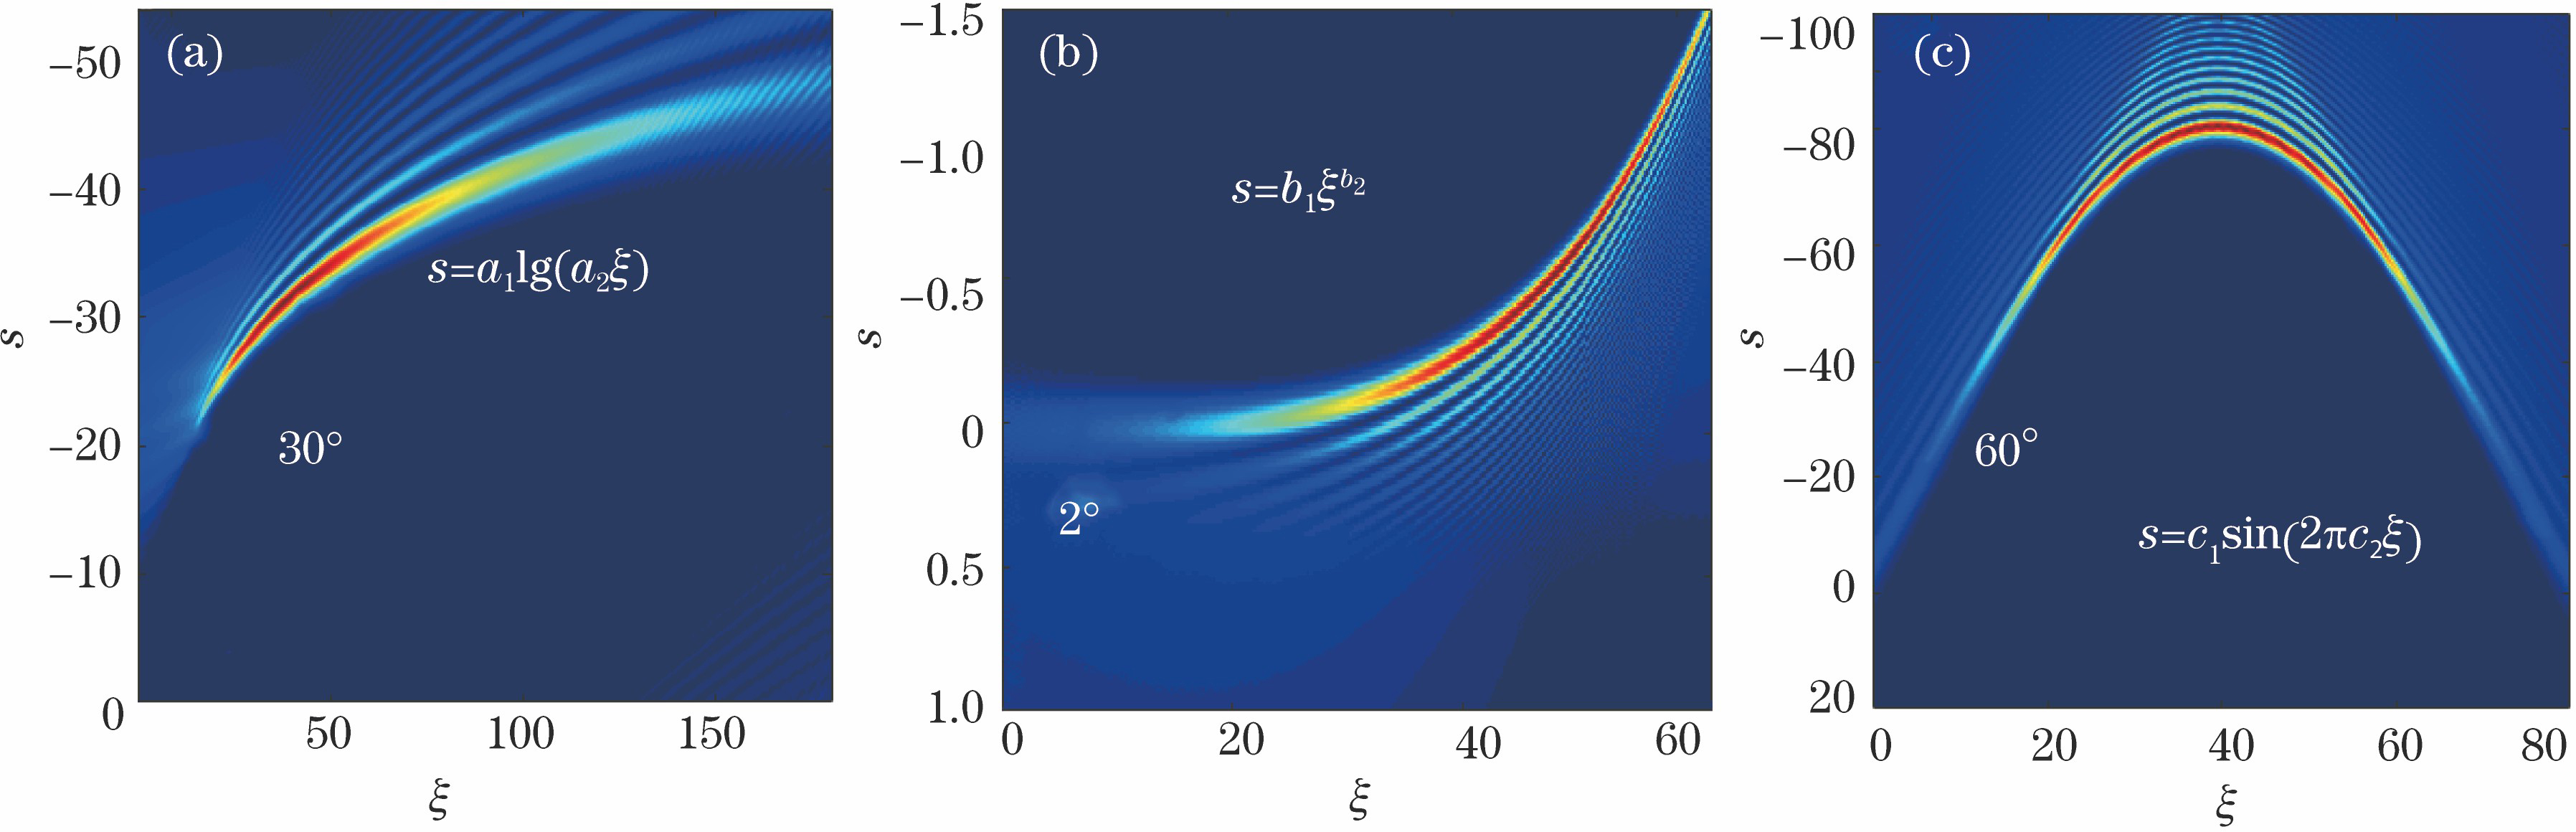 One-dimensional optical field evolutions of tunable accelerating beams. (a) Logarithmic trajectory, a1=10, a2=0.6; (b) fourth-power trajectory, b1=10-7, b2=4; (c) sinusoidal trajectory, c1=80, c2=160